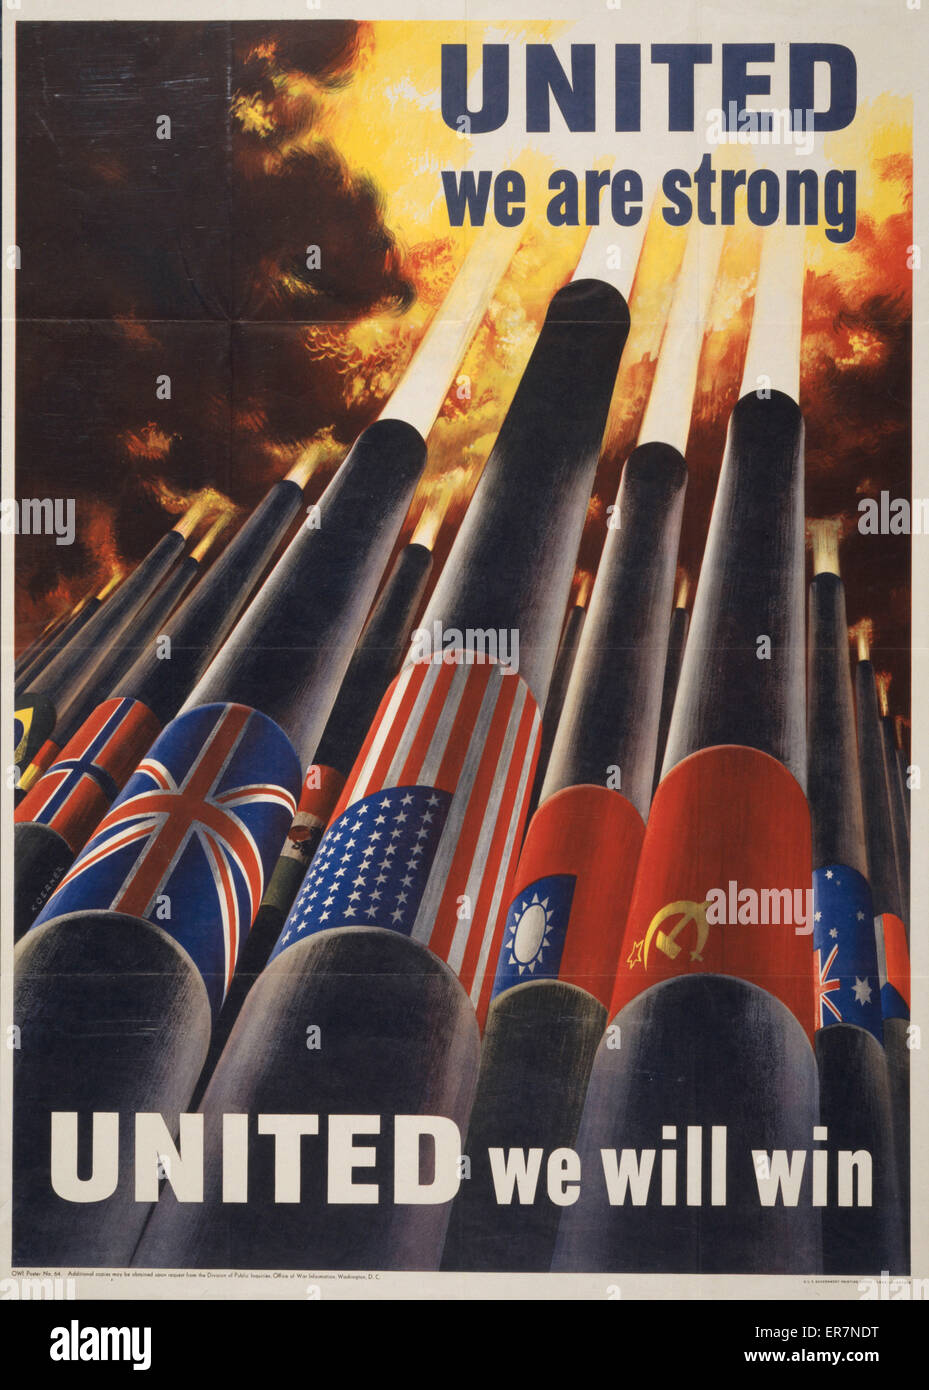 United we are strong, united we can win. World War II poster showing cannons, each with the flag of an allied power, blasting into the sky. Date 1943 (,e Washington, DC :. Stock Photo